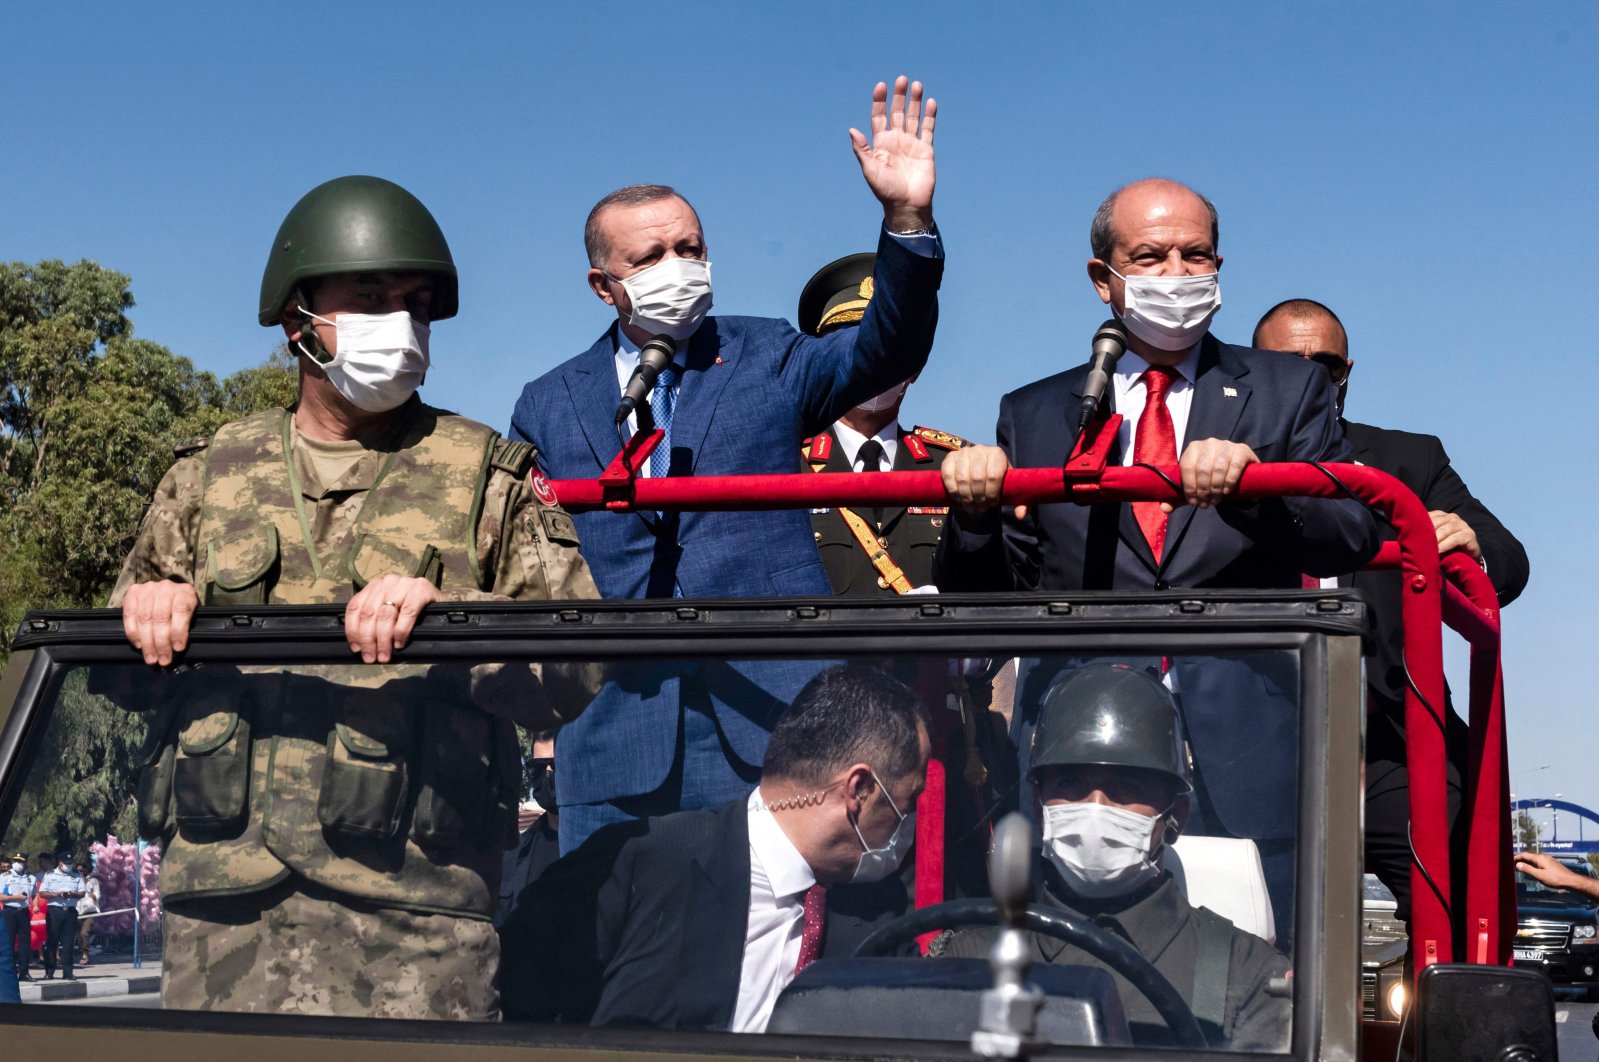 Turkish Cypriot President Ersin Tatar (C-R) and his Turkish counterpart Recep Tayyip Erdoğan (C-L) wave as they take part in a parade in the Turkish Republic of Northern Cyprus, July 20, 2021. (AFP Photo)